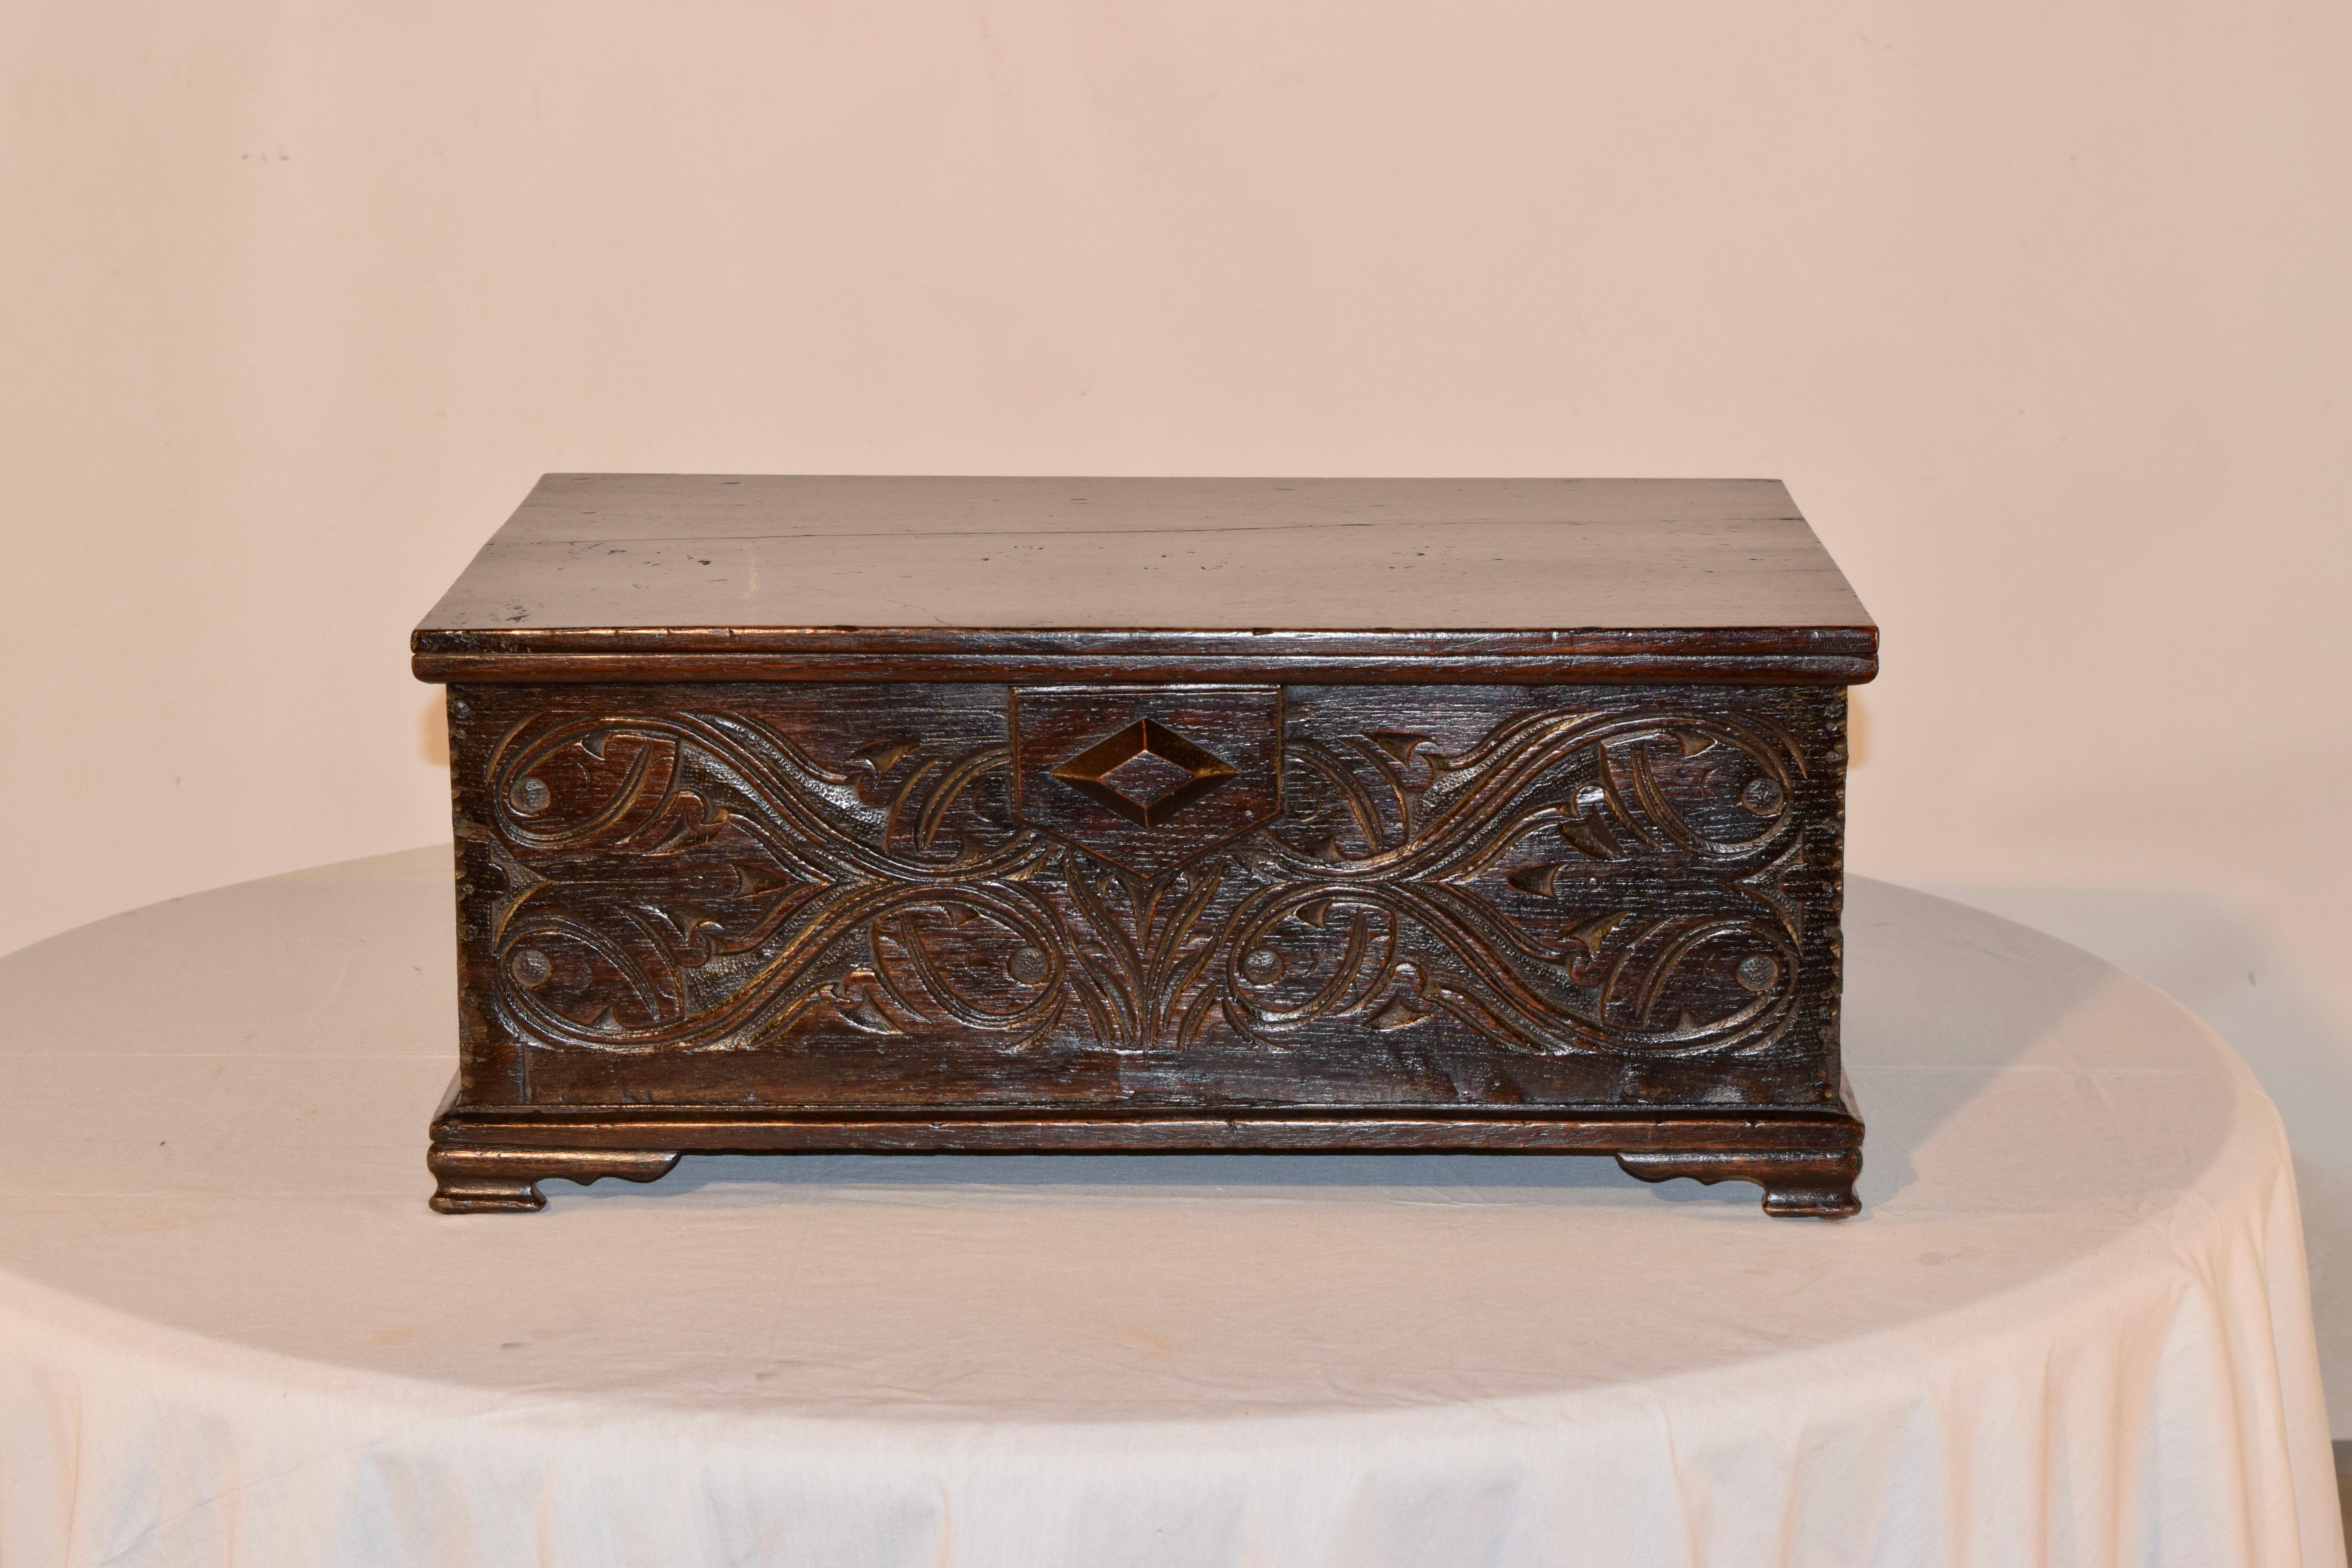 Mid-18th-century bible box from England, made from oak. The top is made from two boards, and rests on the box, which is hand carved decorated on three sides. The box has pegged construction and has pie crust edges on the sides of the front panel.